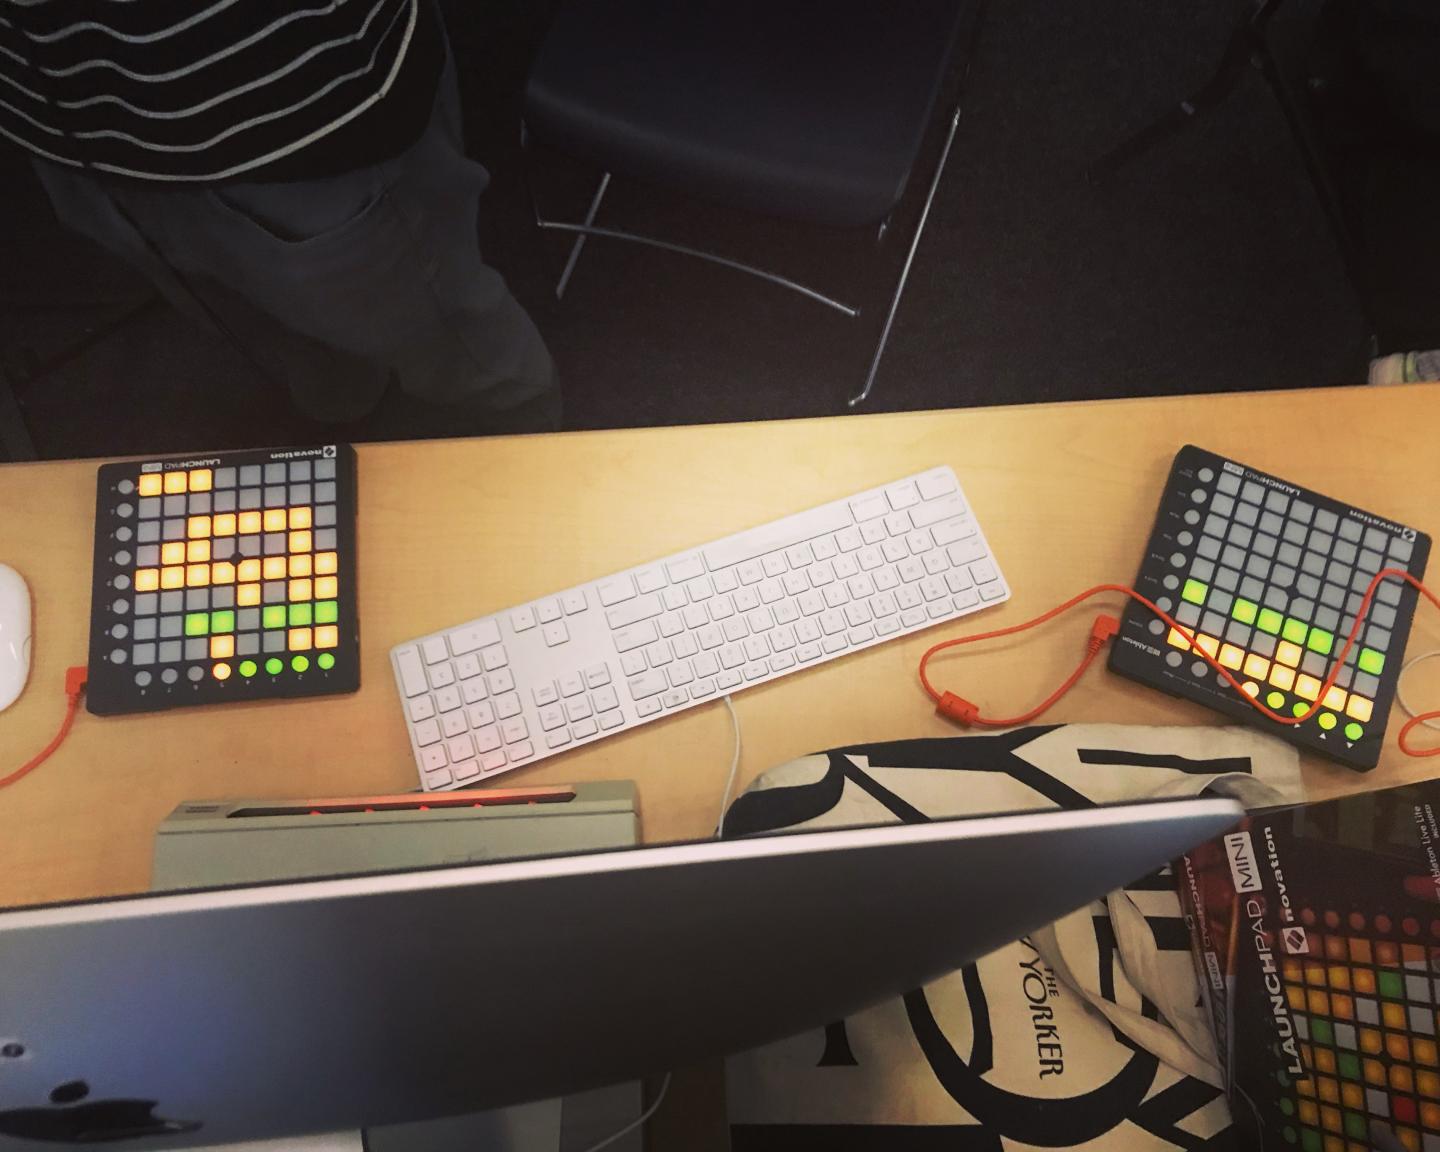 Use our Launchpad Mini MK2s in our lab